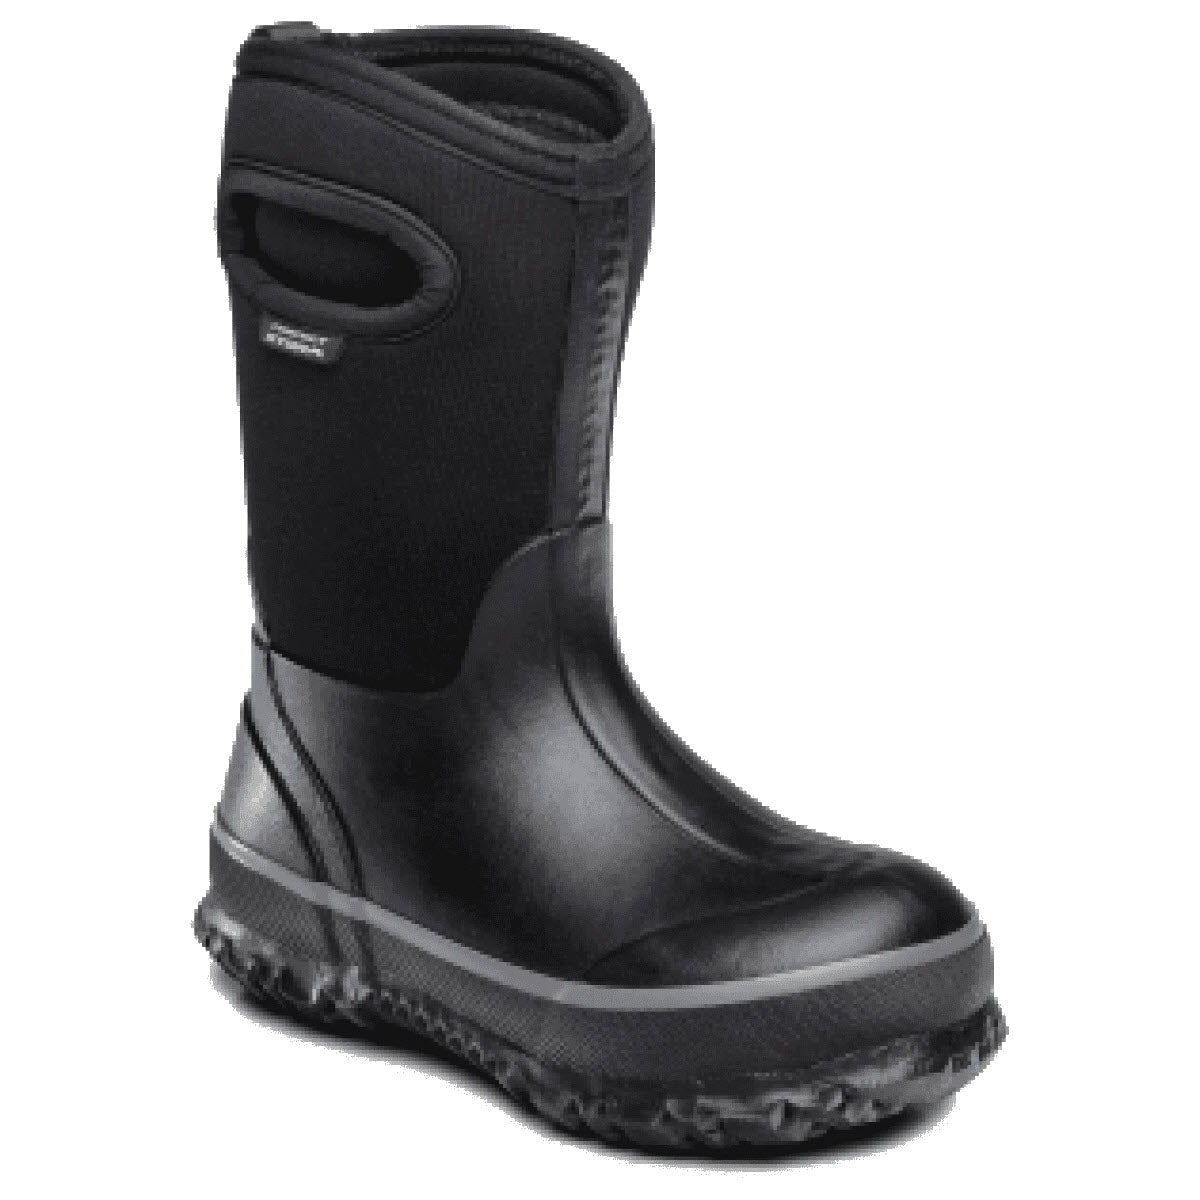 Perfect Storm Classic High Black/Grey - Kids waterproof insulated boot with neoprene insulation shaft and non-slip outsole.